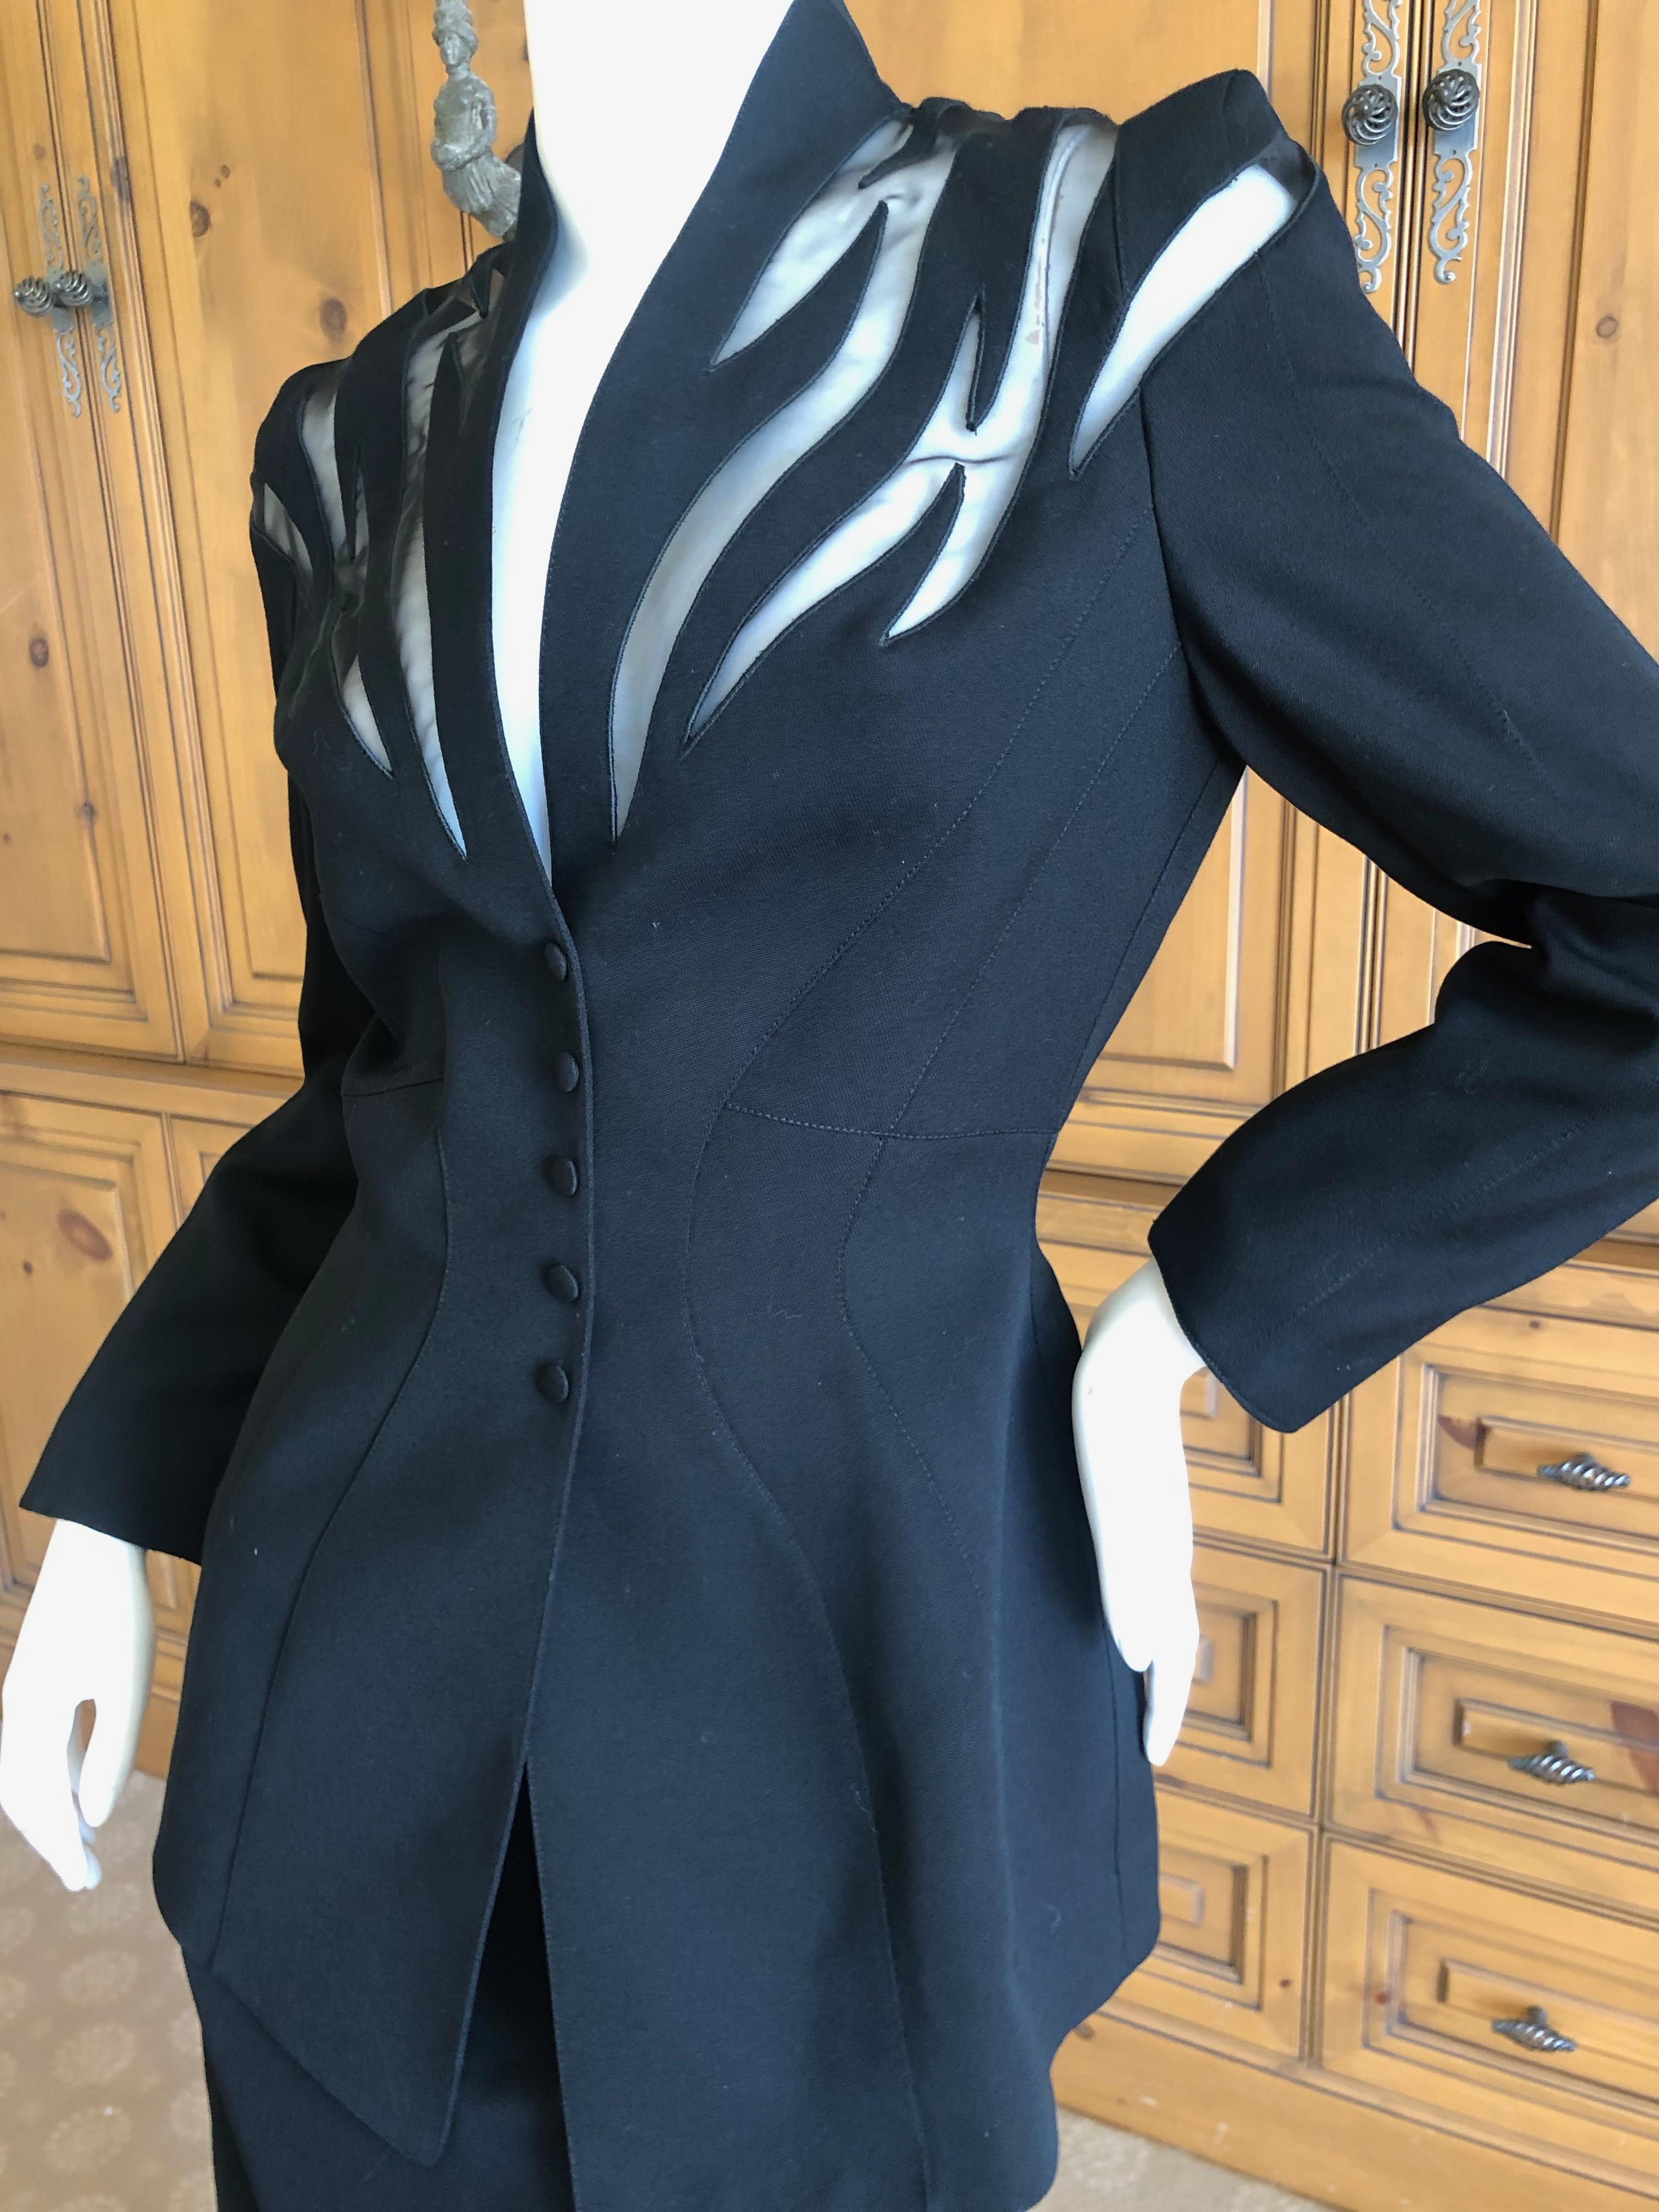 Thierry Mugler Vintage 1980's Black Peplum Suit with Sheer Flame Pattern Details For Sale 2